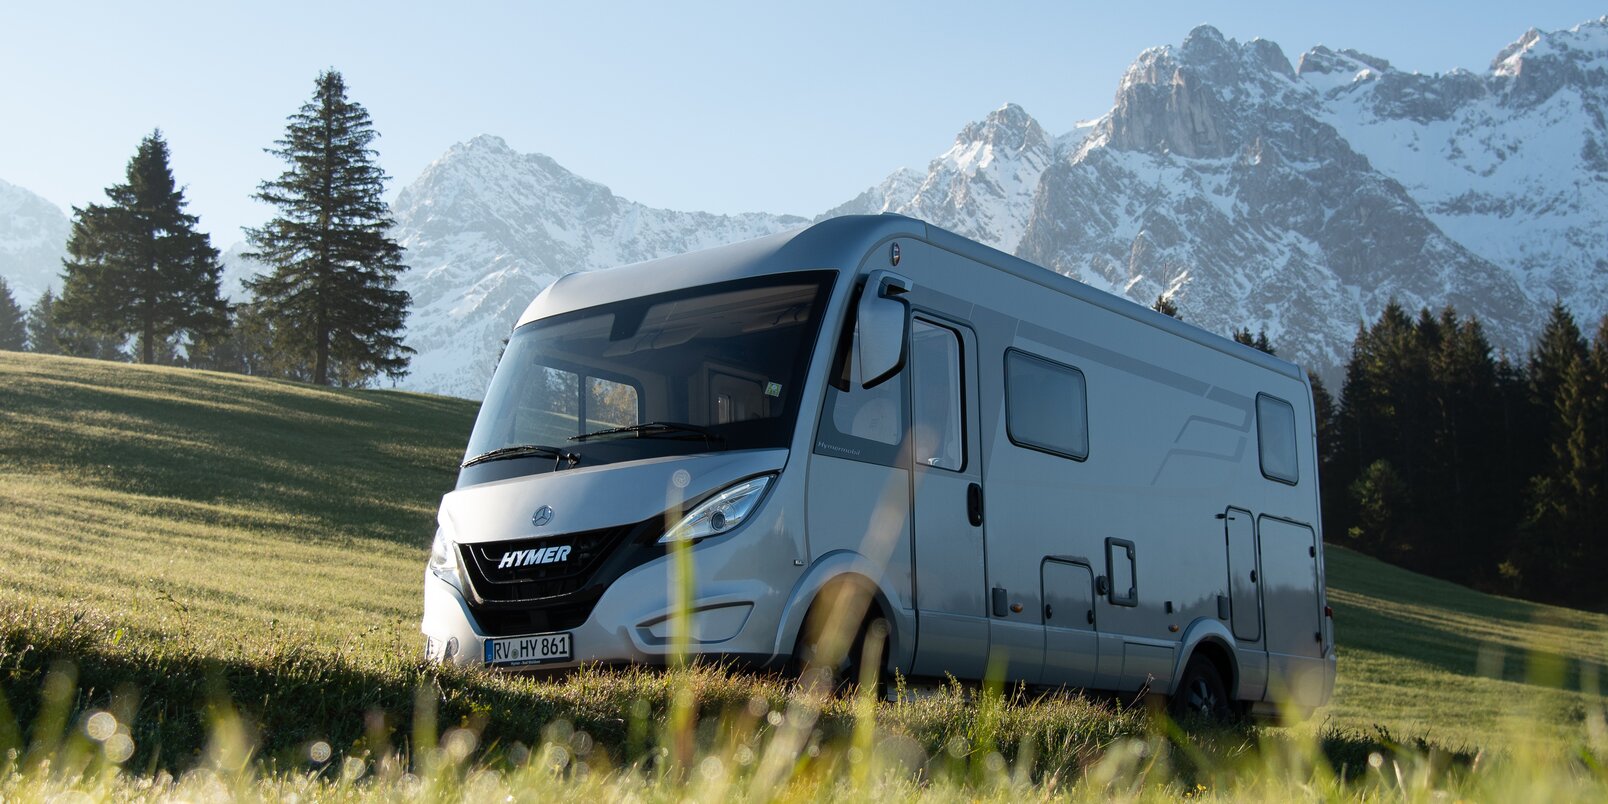 HYMER B ModernComfort in a meadow with snow-capped mountains and blue sky